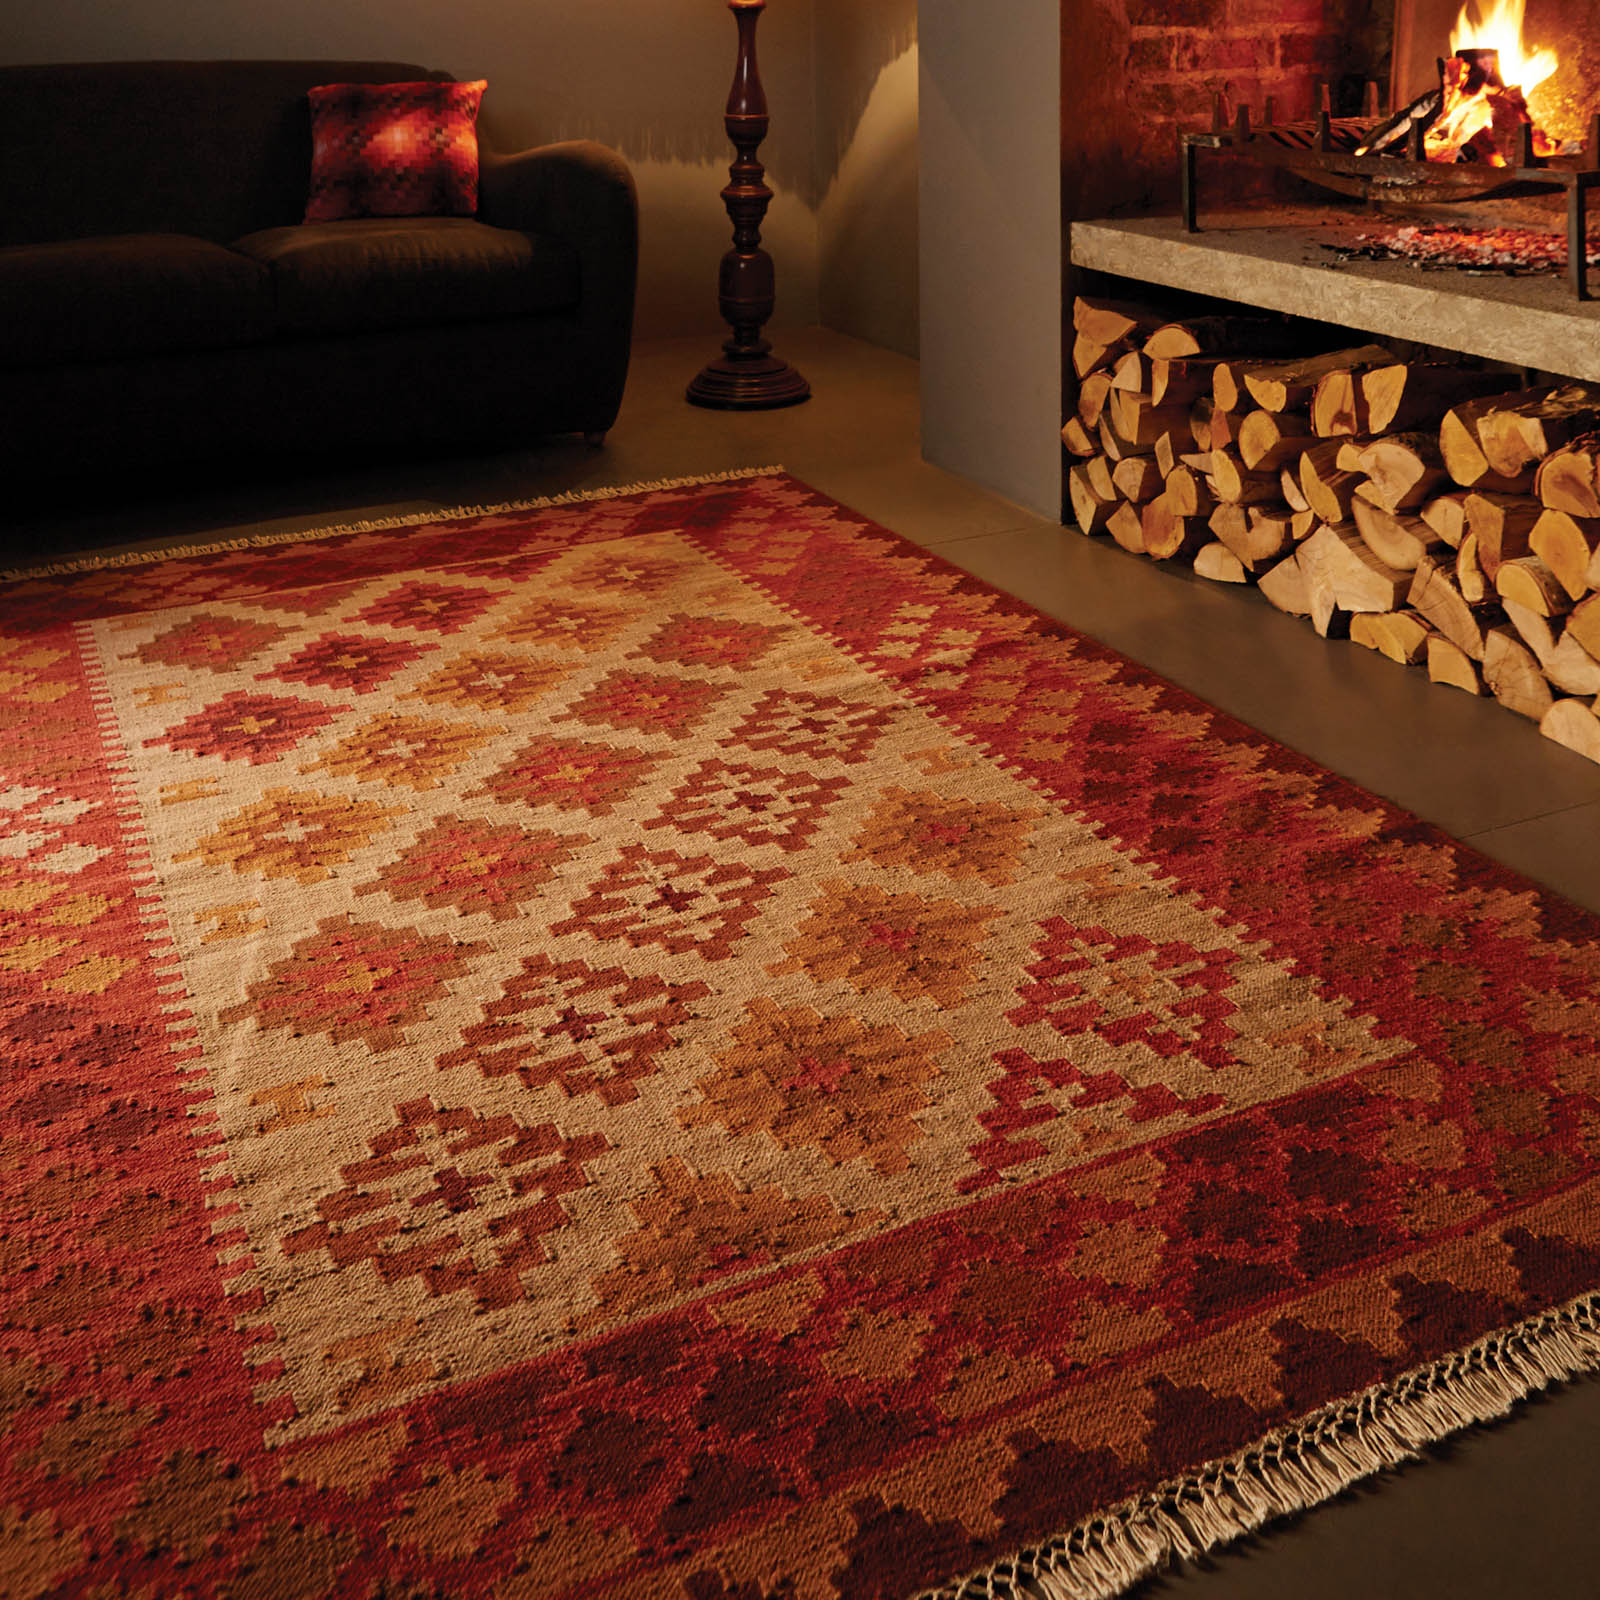 kilim rug on concrete floor next to fireplace and black couch